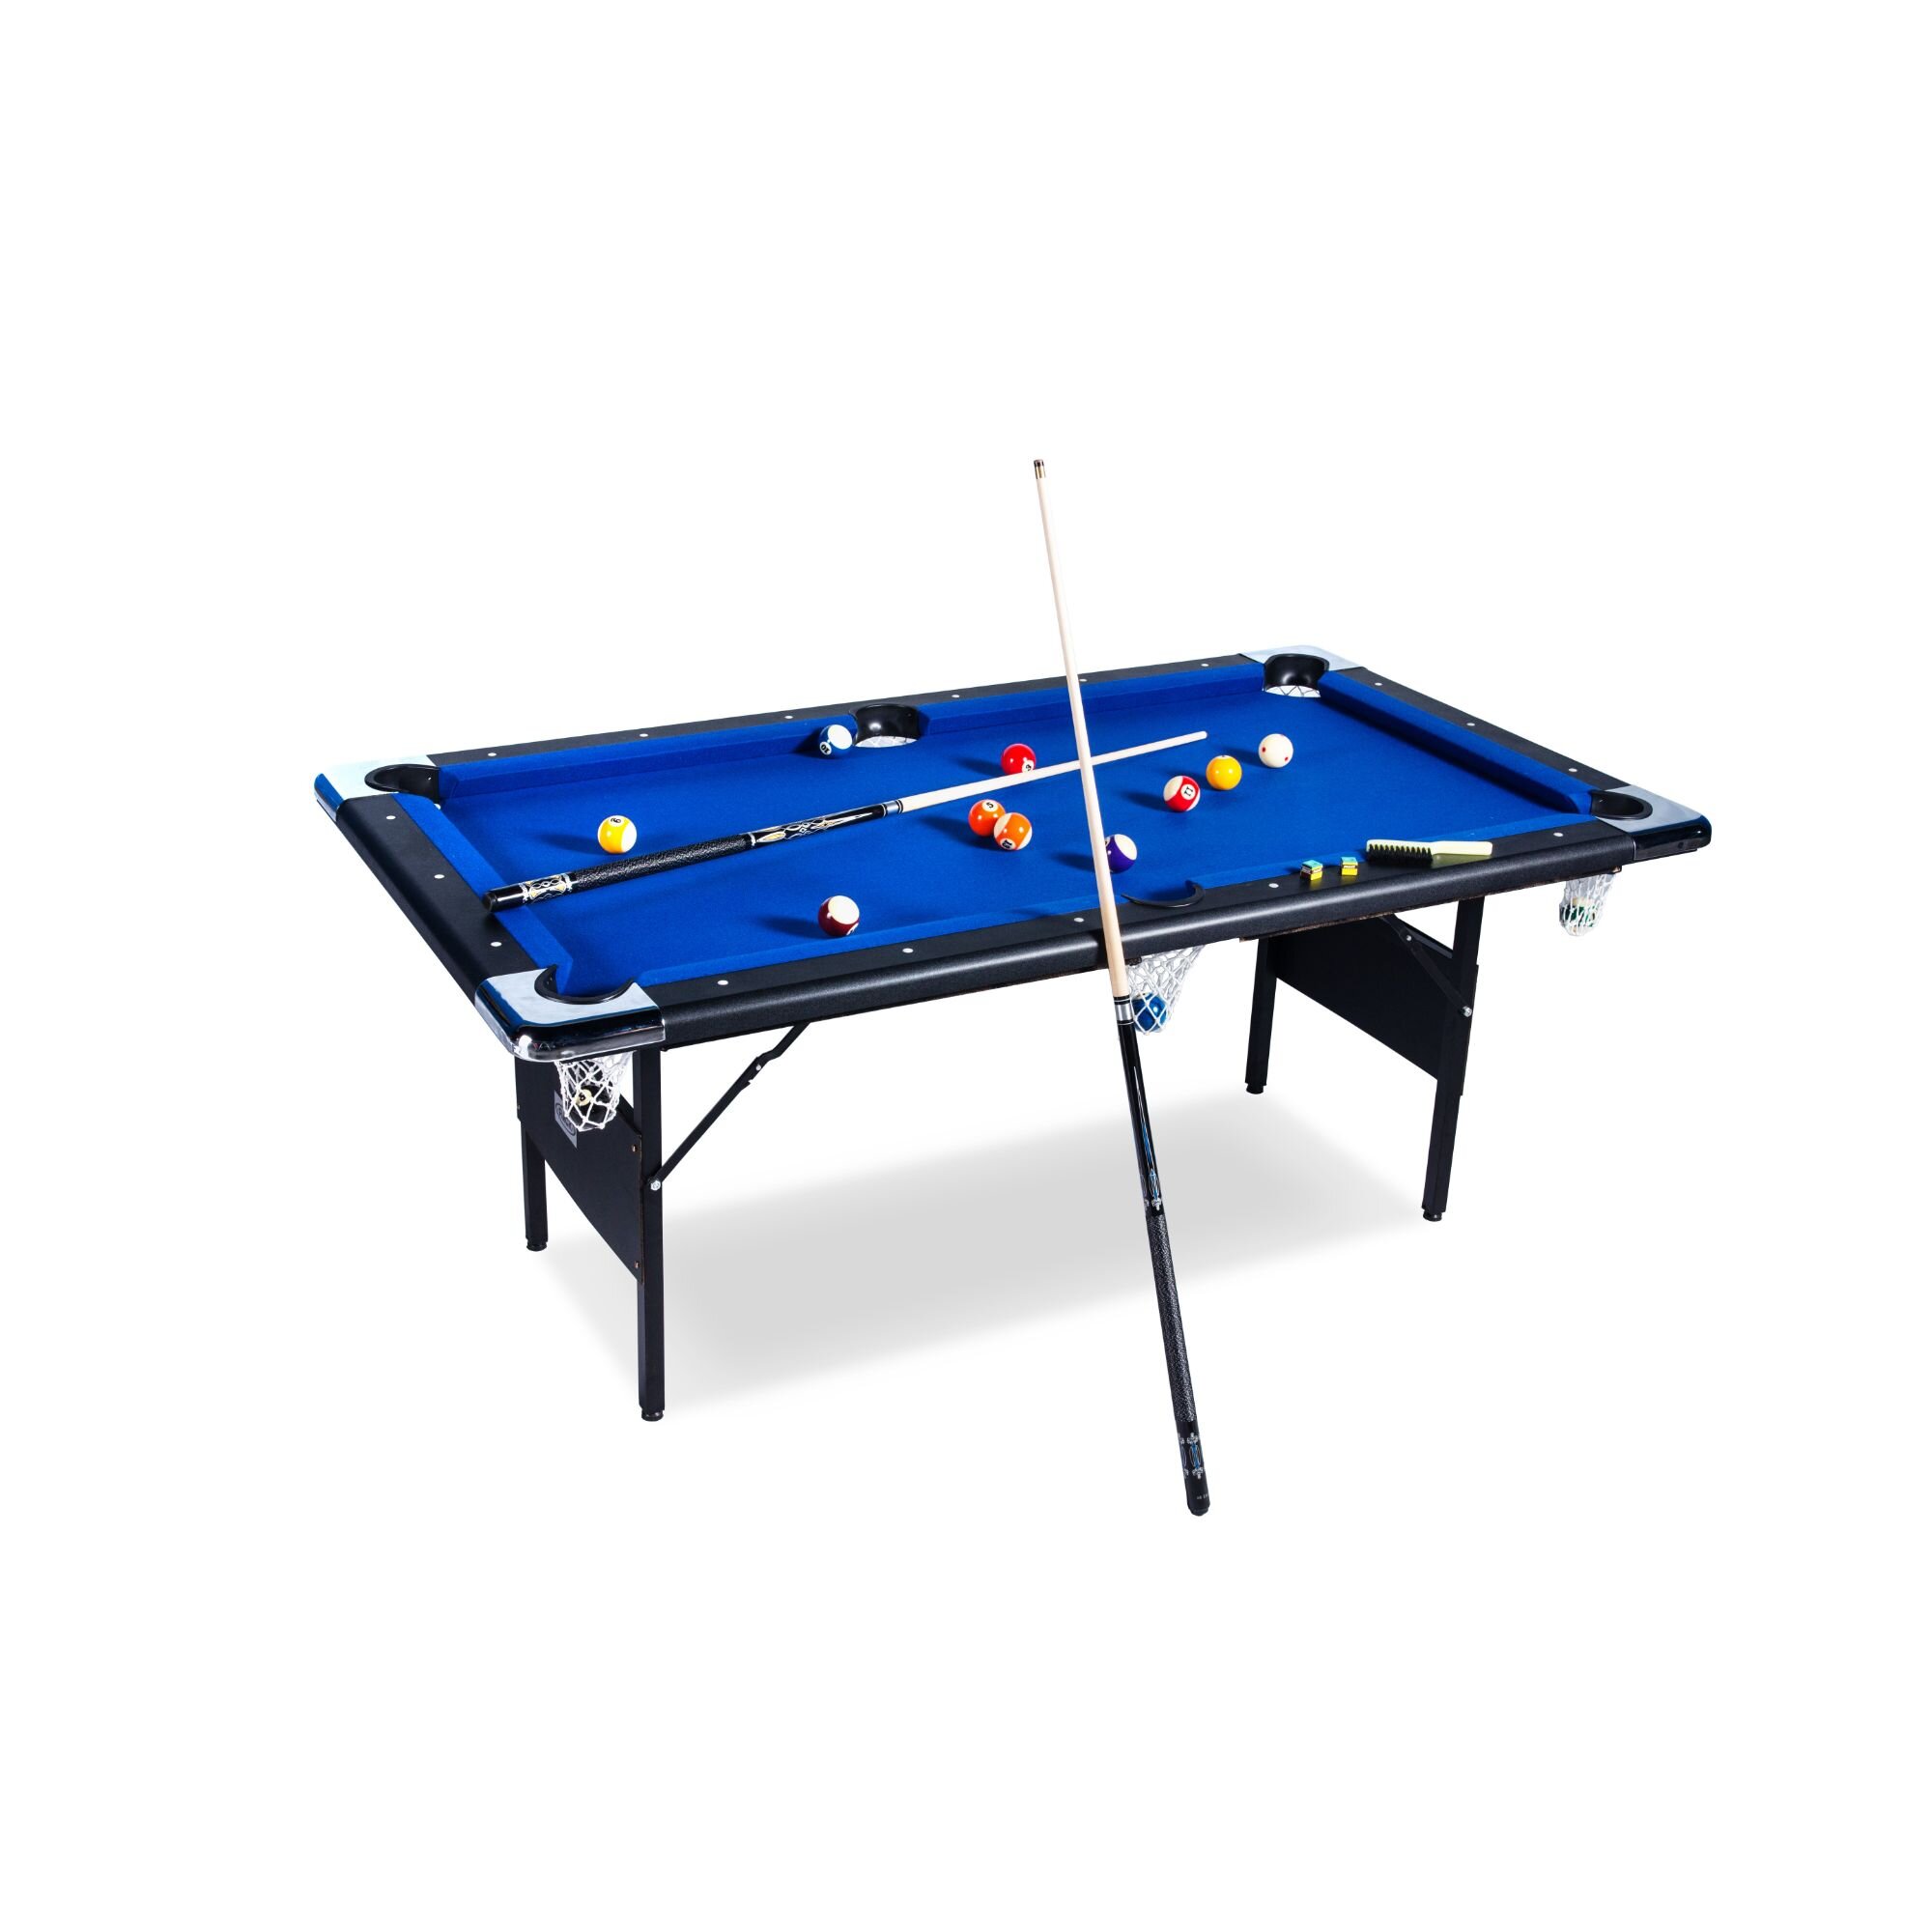 Billiards Pool Table Eight-Ball Standard ABS Triangle Rack Frame Accessories 